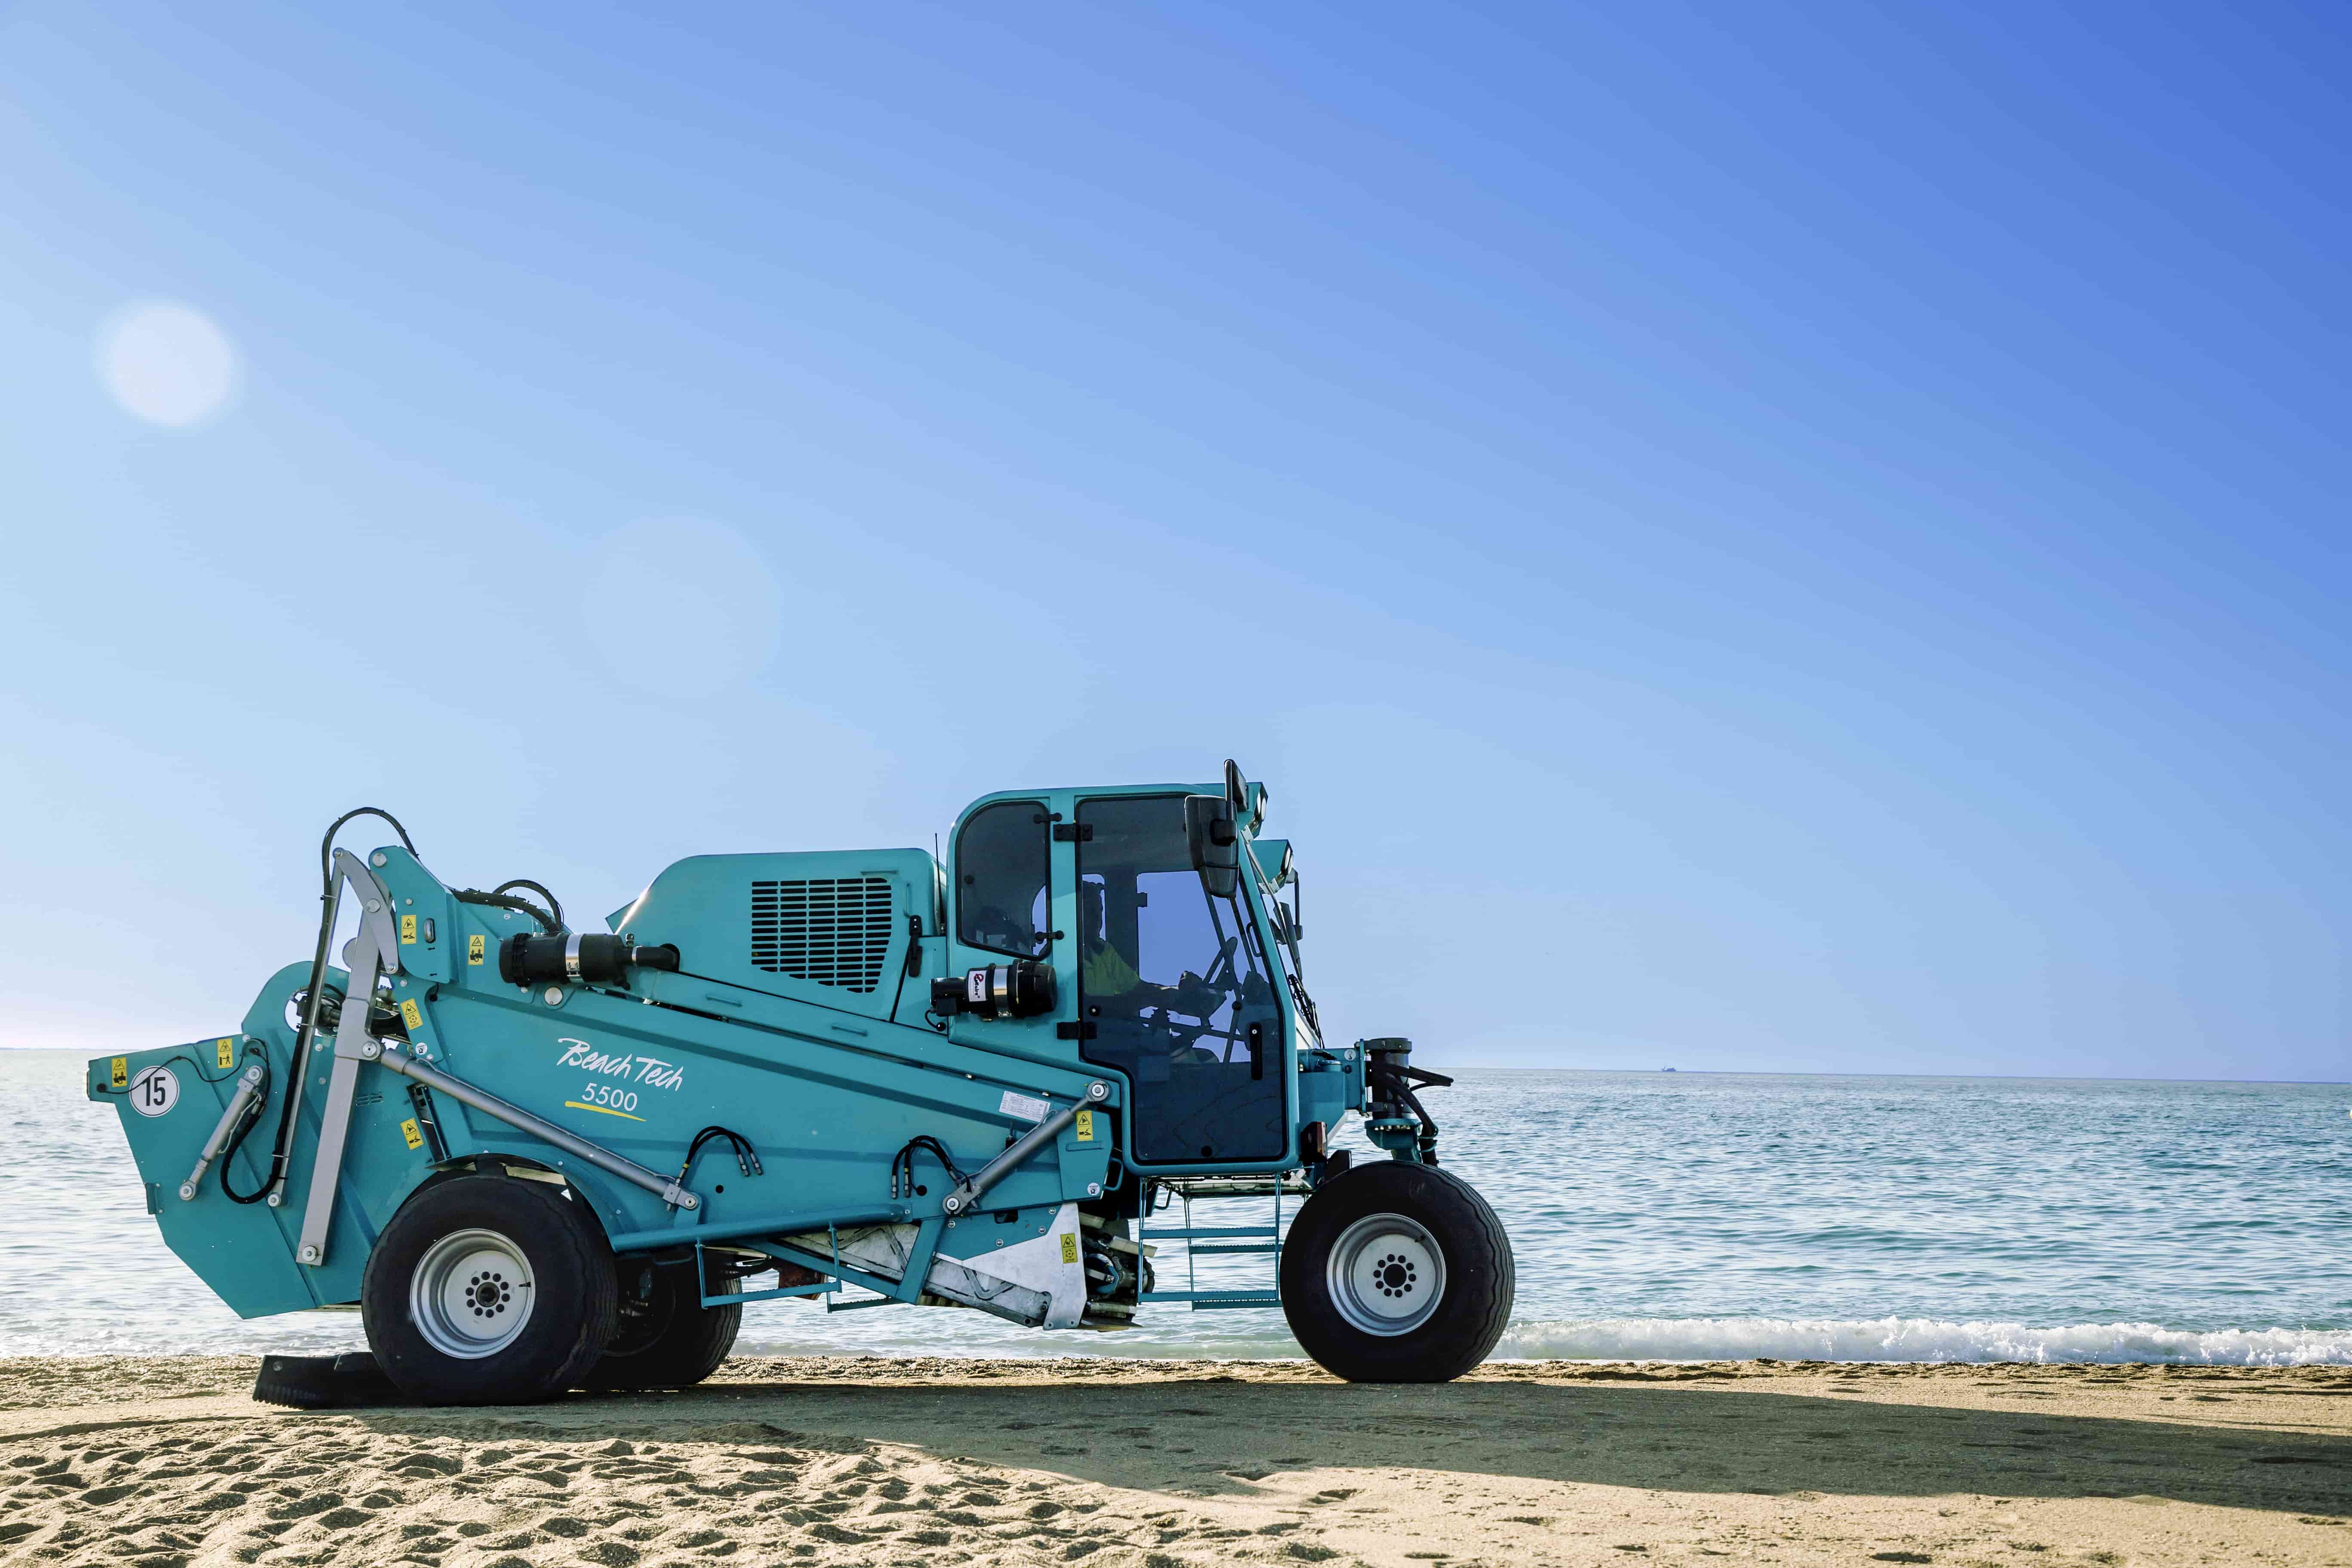 The BeachTech 5500 beach cleaning machine with its three-wheel-design cleaning a beach.